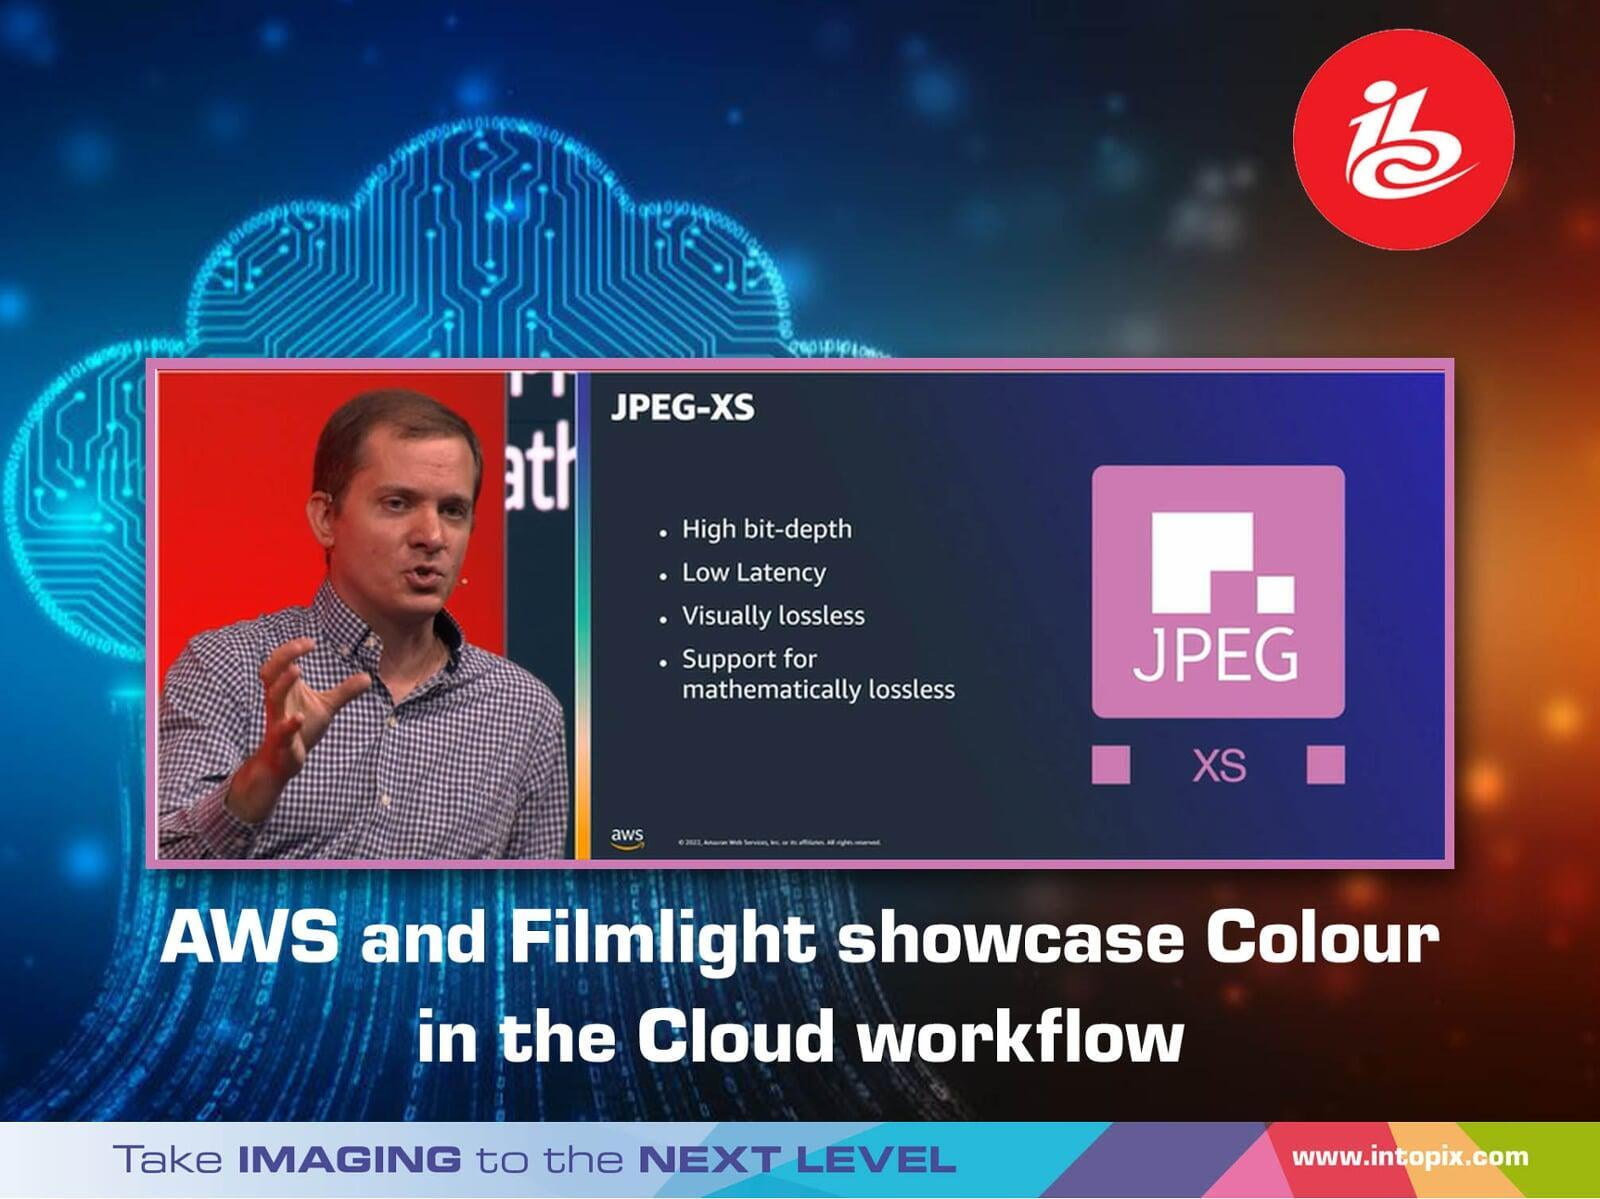 AWS and Filmlight showcase Colour in the Cloud workflow, powered by JPEG XS